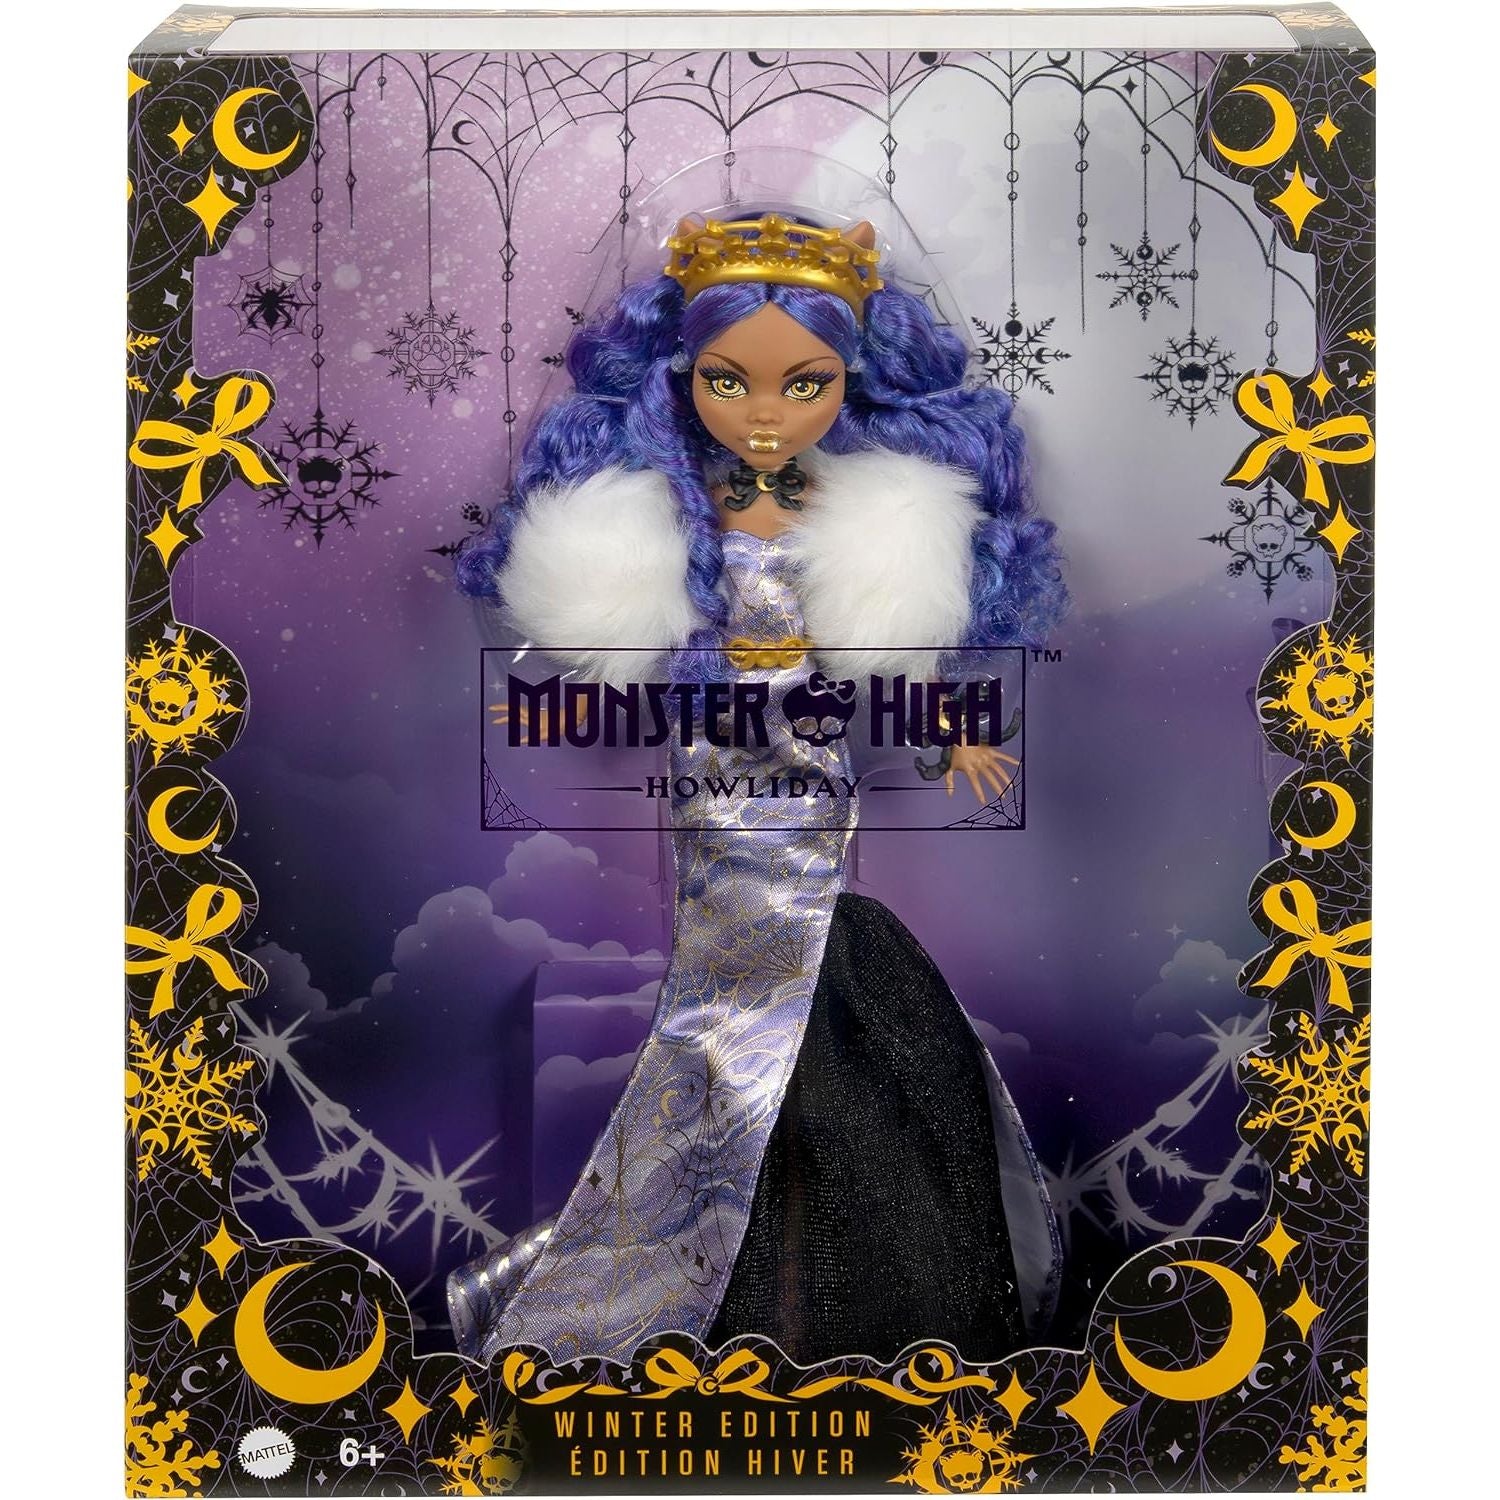 Monster High Doll, Clawdeen Wolf Howliday Collectible in ICY Lavender Gown with Furry Boa & Accessories